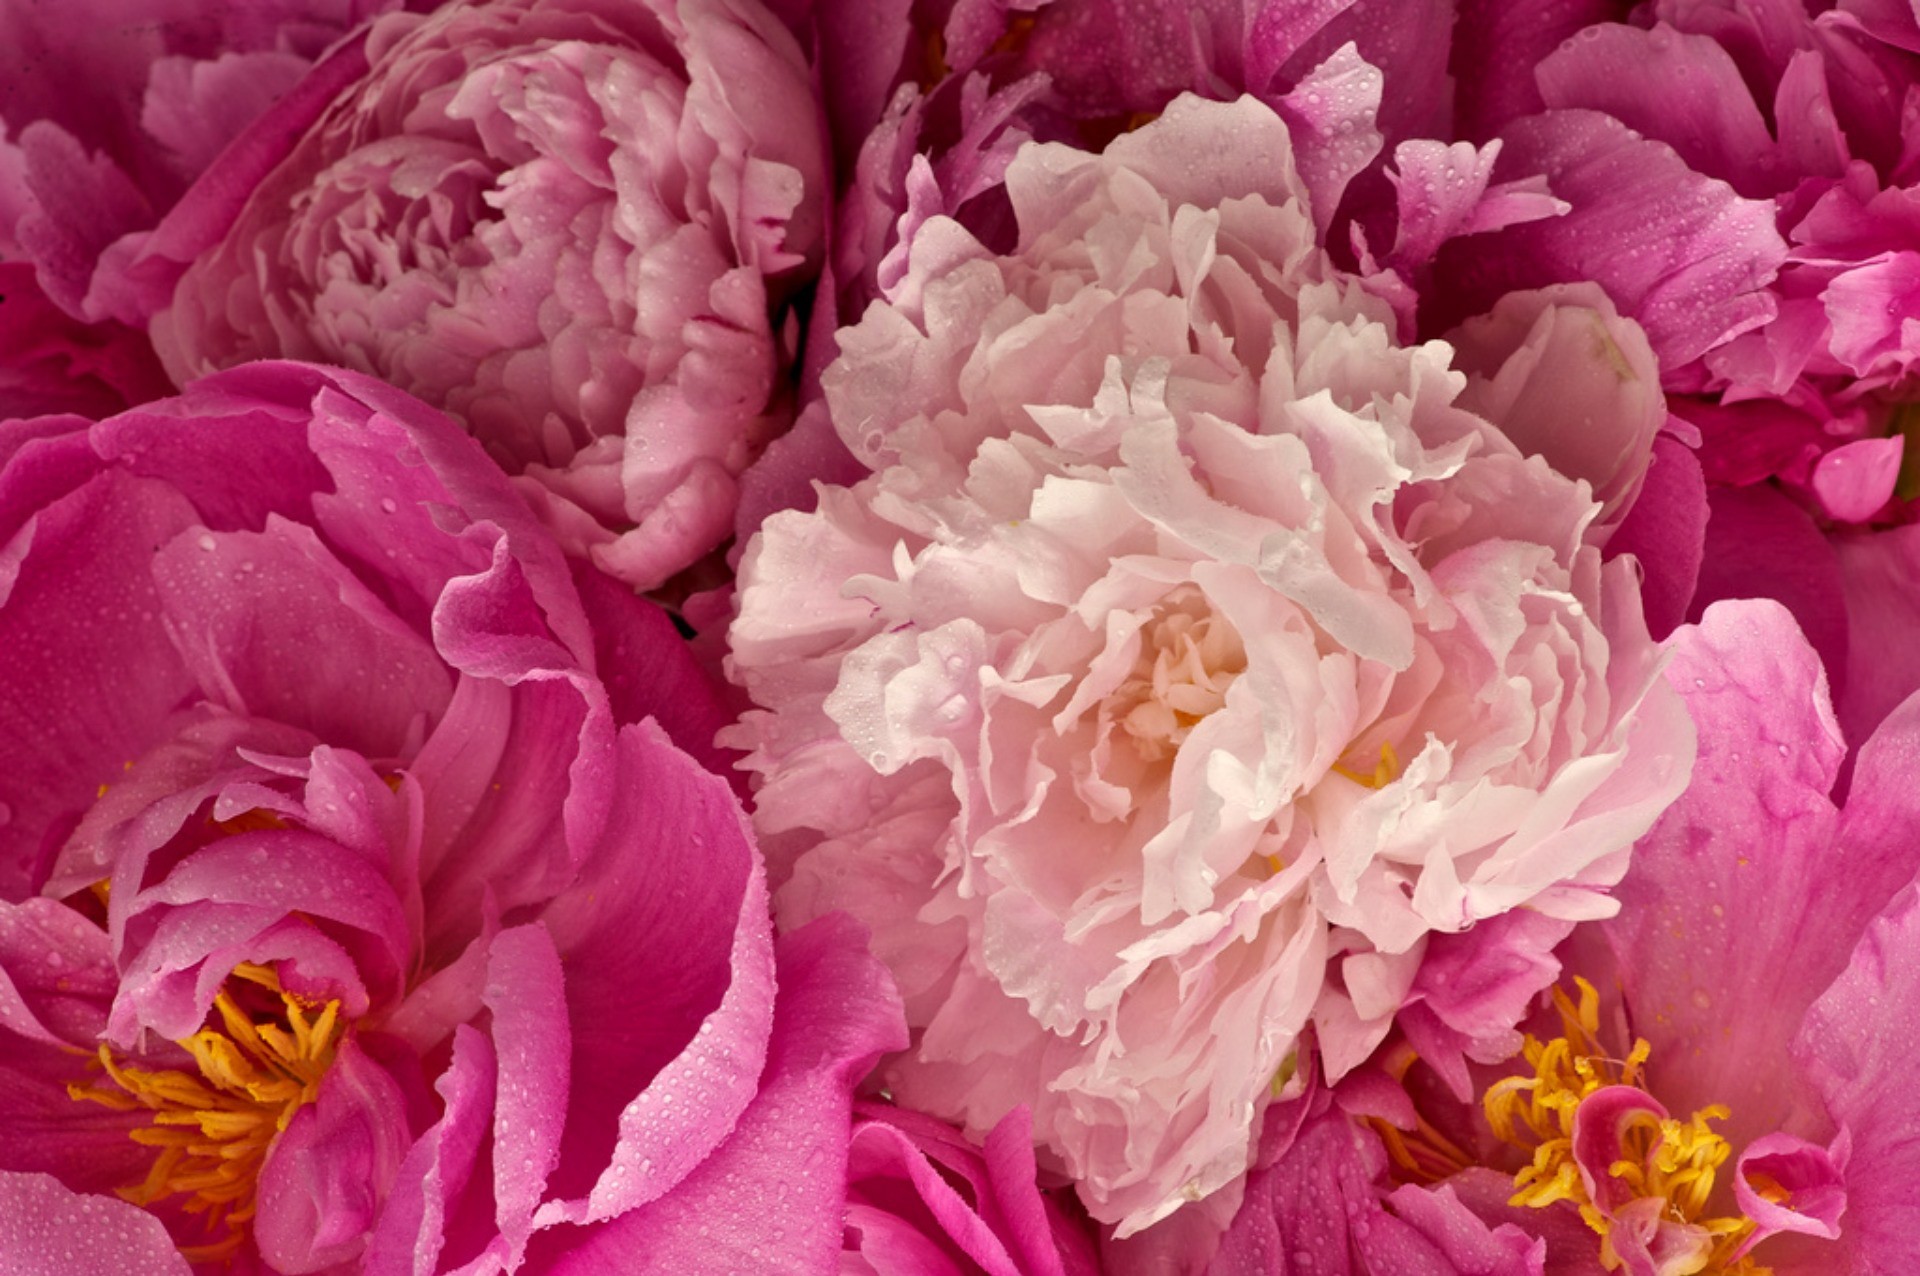 1920x1276 Peony Pictures HD Peony wallpaper download hd